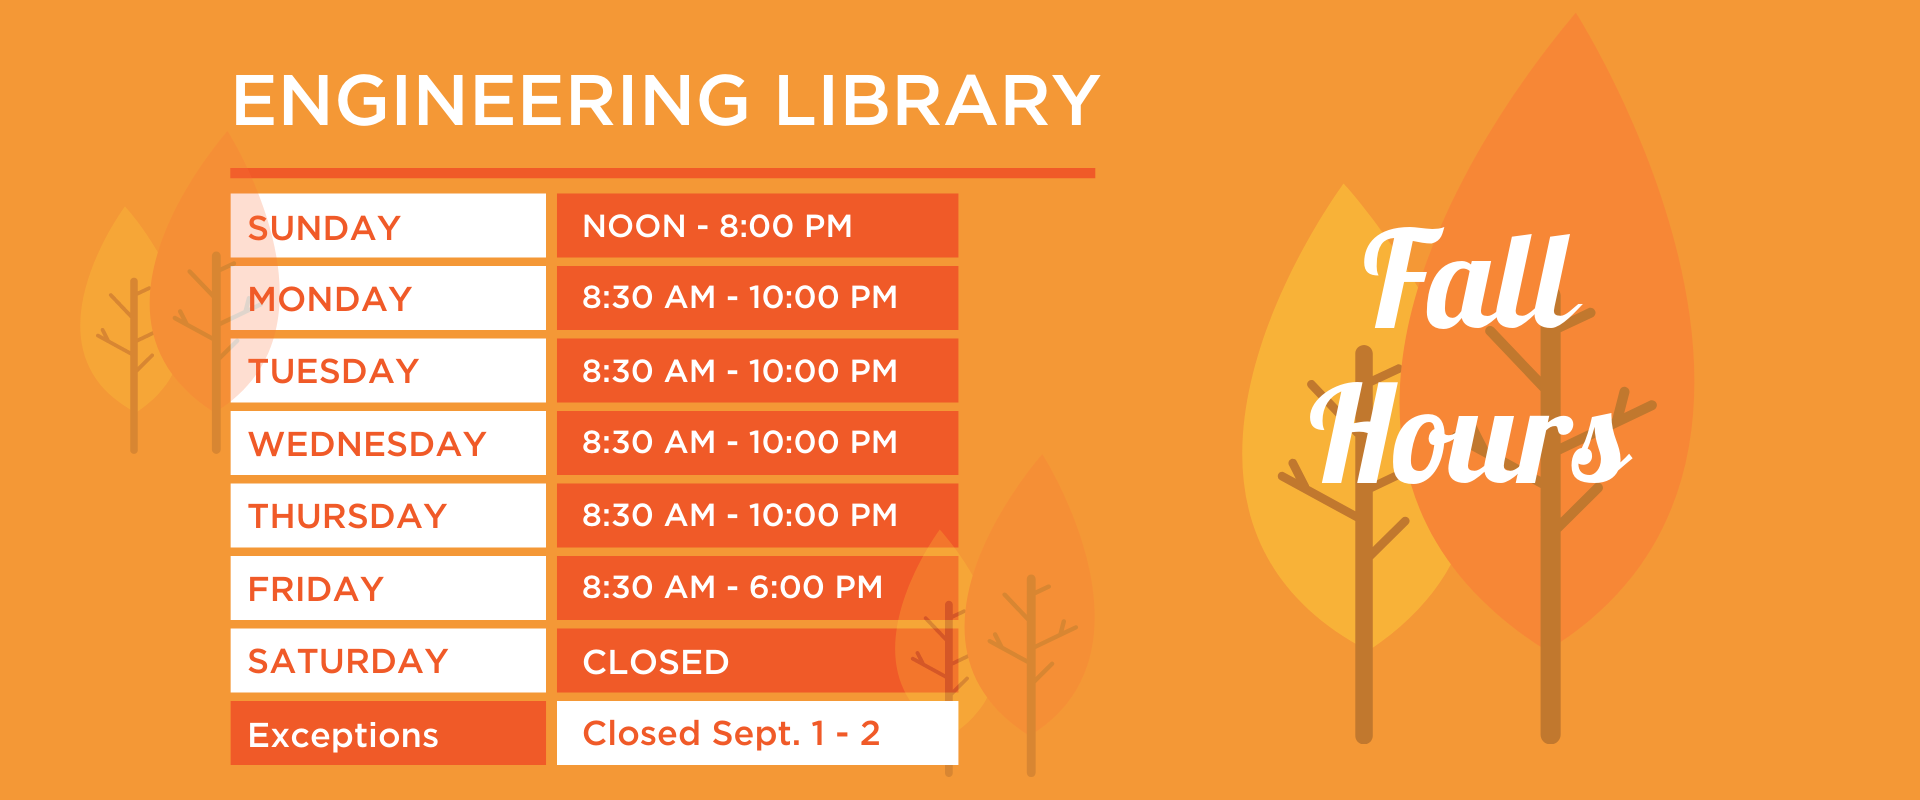 Fall Engineering Library Hours